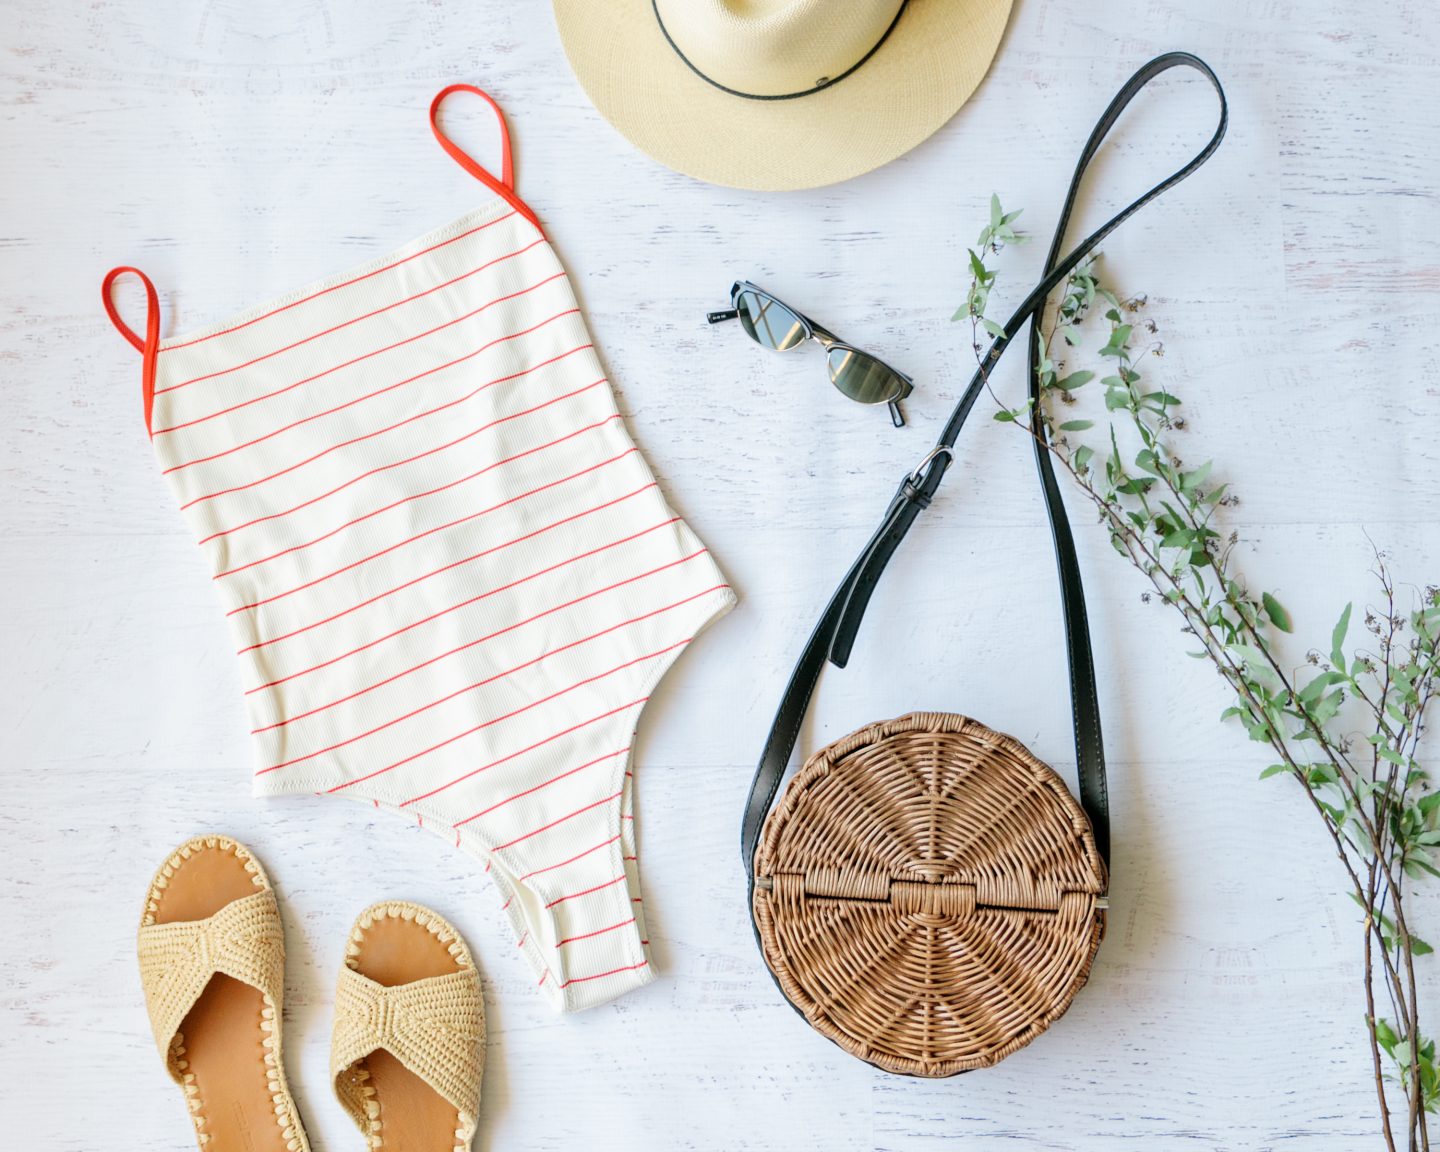 Swimsuits I'm Coveting for Summer - Fortune Inspired